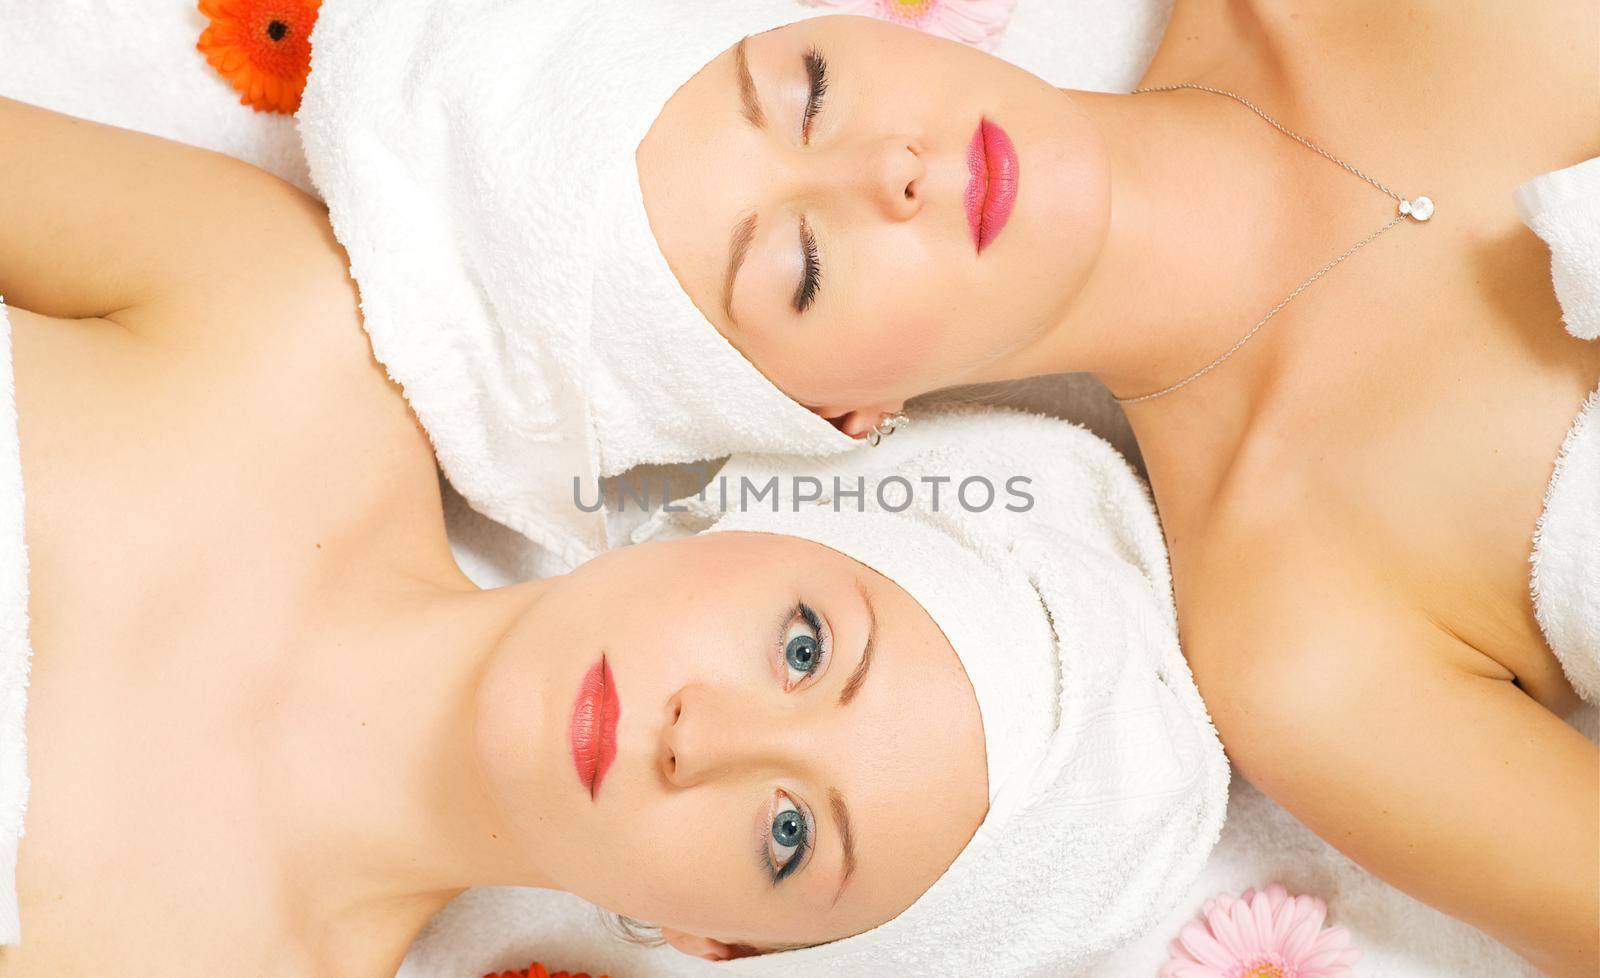 Two girls relaxing in a wellness set-up seen from above, horizontally aligned, with some flowers, closed eyes